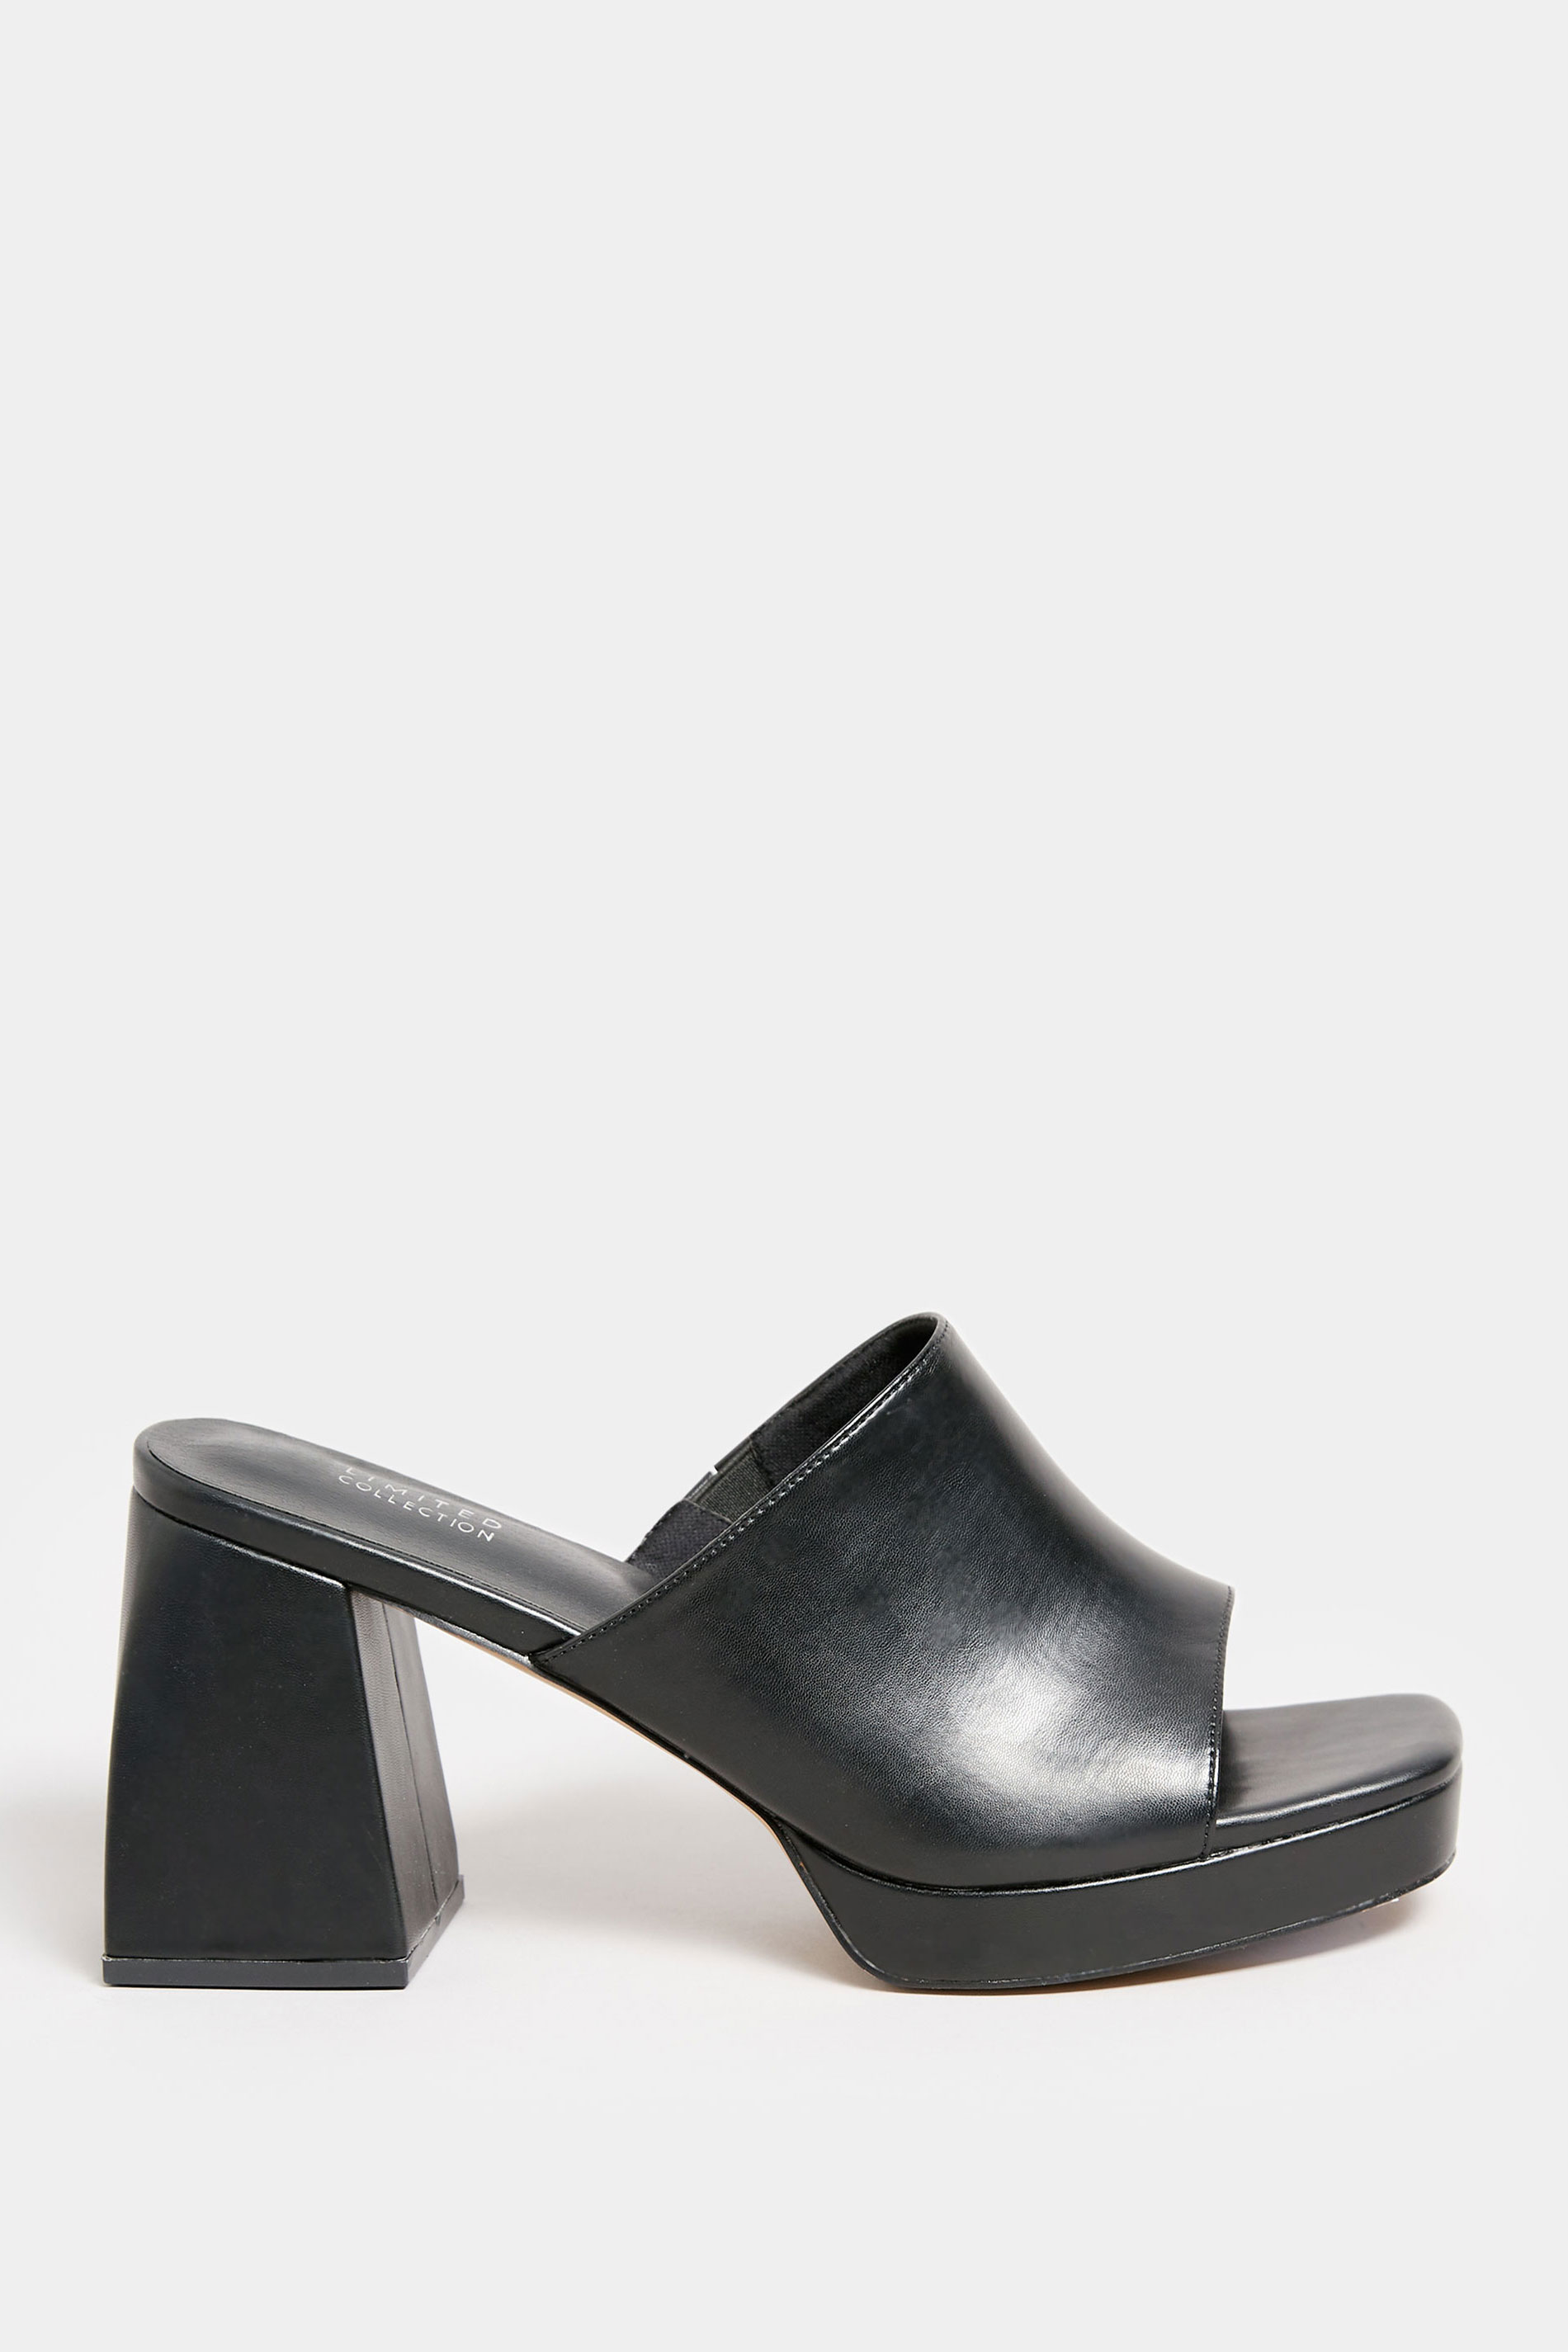 LIMITED COLLECTION Plus Size Black Platform Block Mule Sandal Heels In Wide E Fit | Yours Clothing  3